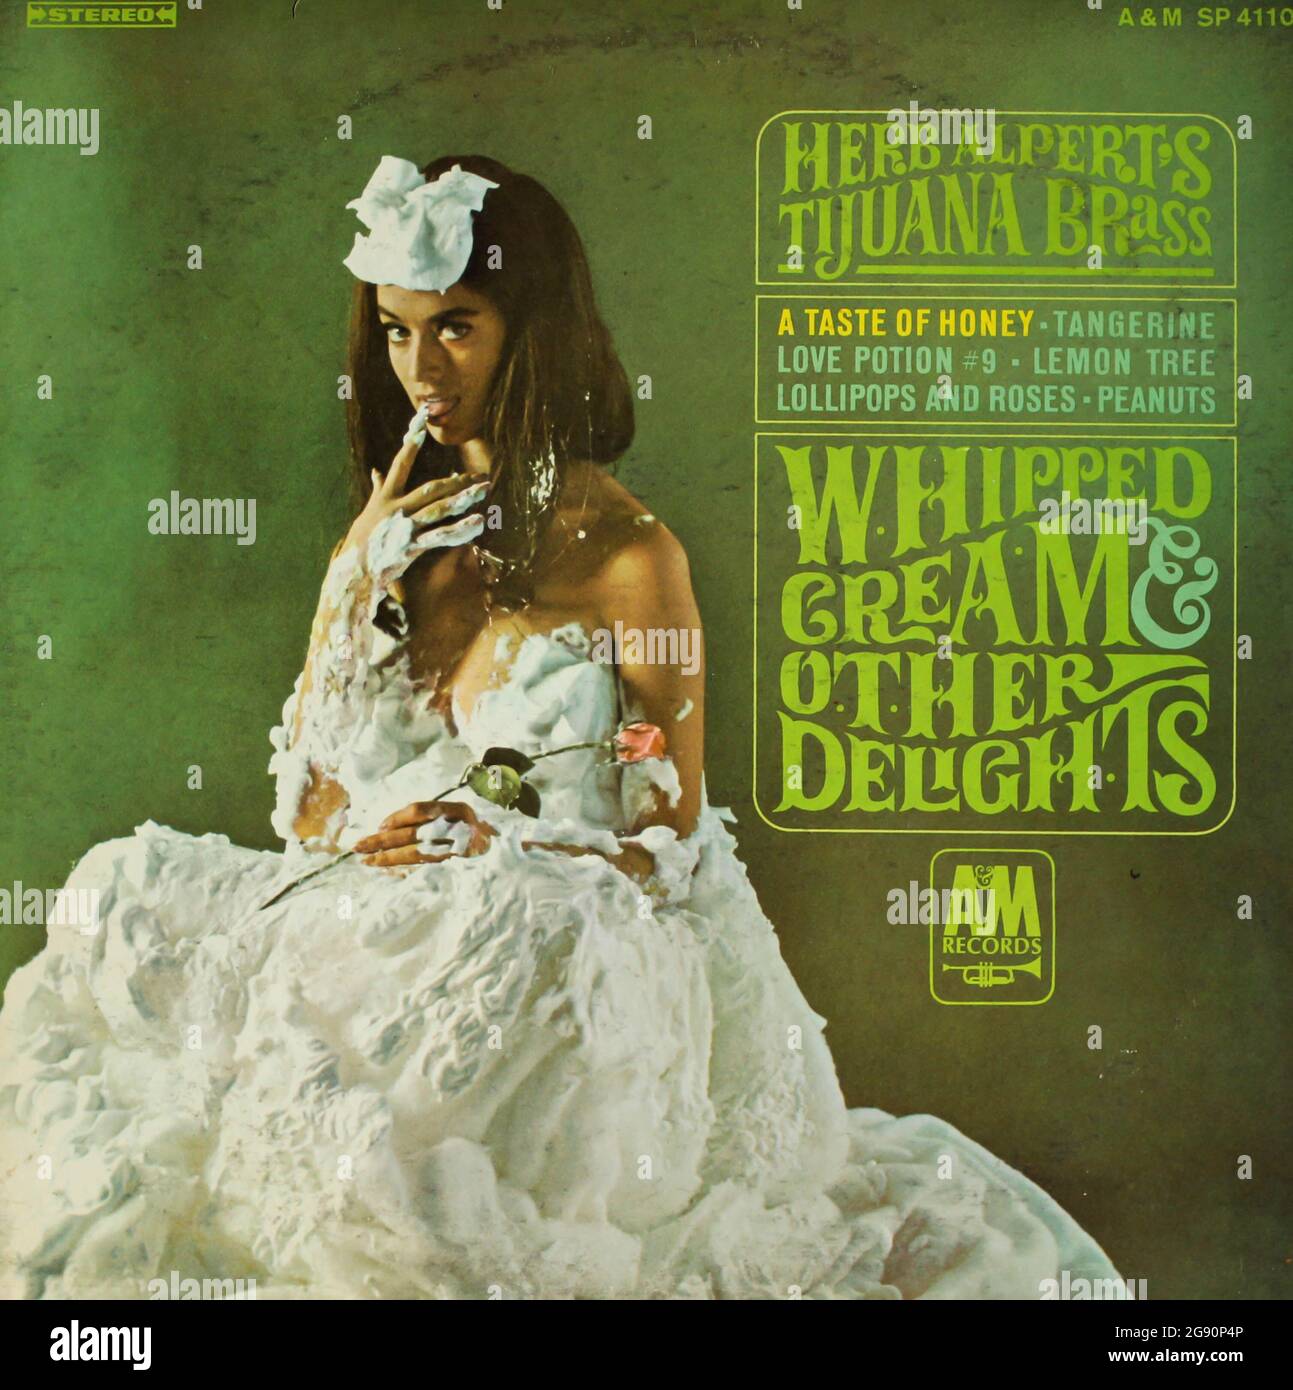 Whipped Cream and Other Delights is a 1965 album by Herb Alpert and the Tijuana Brass music album vinyl record album cover Herb Alpert's Tijuana Brass Stock Photo